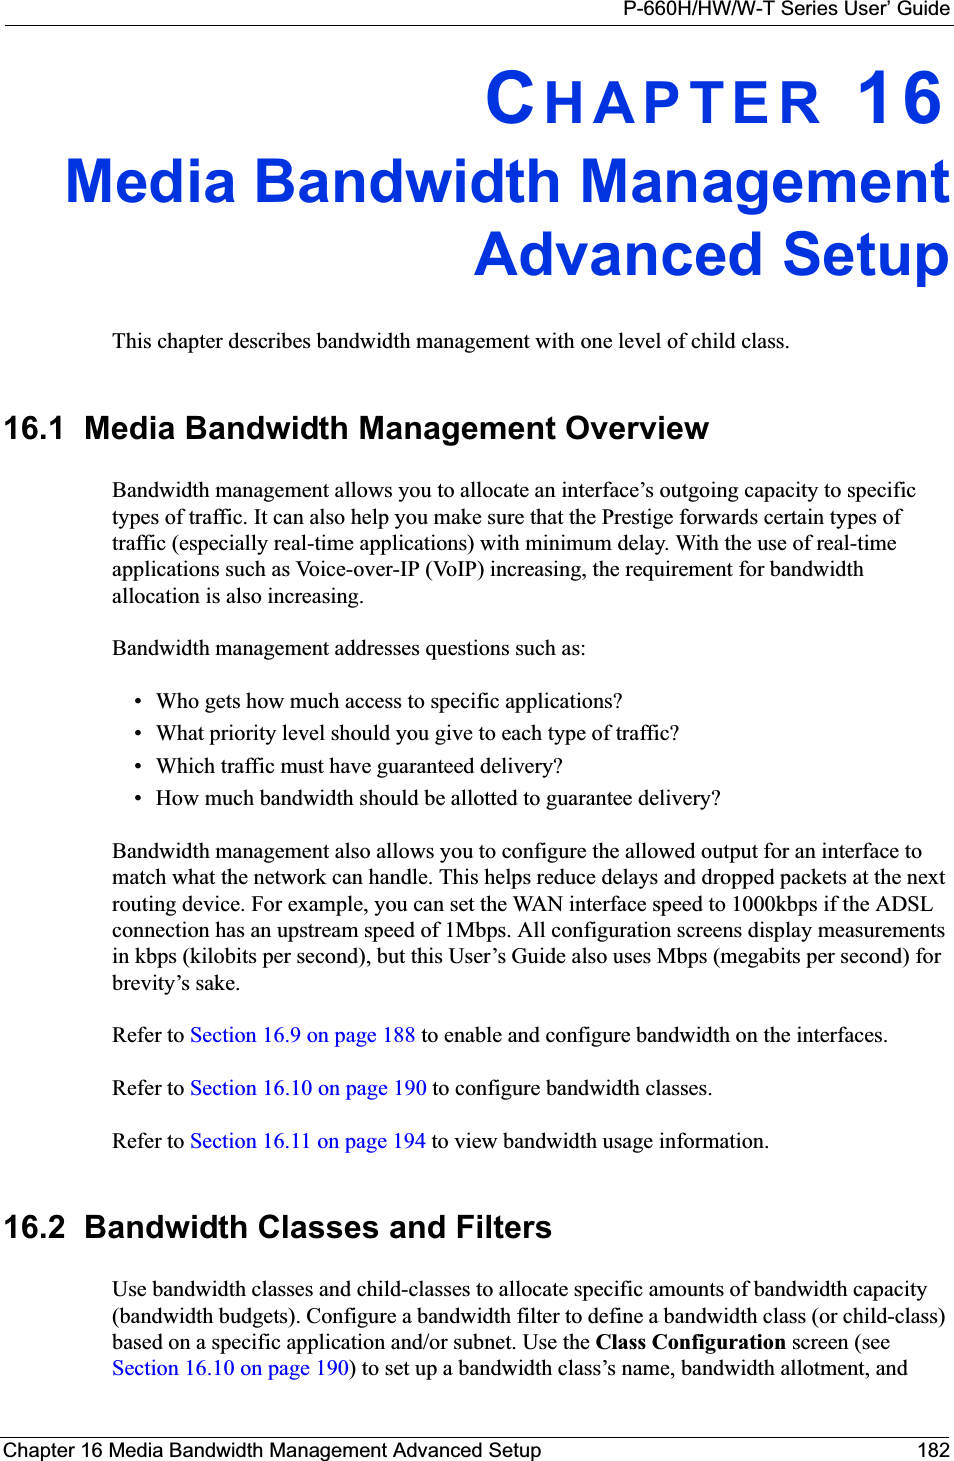 P-660H/HW/W-T Series User’ GuideChapter 16 Media Bandwidth Management Advanced Setup 182CHAPTER 16Media Bandwidth ManagementAdvanced SetupThis chapter describes bandwidth management with one level of child class.16.1  Media Bandwidth Management Overview Bandwidth management allows you to allocate an interface’s outgoing capacity to specific types of traffic. It can also help you make sure that the Prestige forwards certain types of traffic (especially real-time applications) with minimum delay. With the use of real-time applications such as Voice-over-IP (VoIP) increasing, the requirement for bandwidth allocation is also increasing. Bandwidth management addresses questions such as:• Who gets how much access to specific applications?• What priority level should you give to each type of traffic?• Which traffic must have guaranteed delivery?• How much bandwidth should be allotted to guarantee delivery?Bandwidth management also allows you to configure the allowed output for an interface to match what the network can handle. This helps reduce delays and dropped packets at the next routing device. For example, you can set the WAN interface speed to 1000kbps if the ADSL connection has an upstream speed of 1Mbps. All configuration screens display measurements in kbps (kilobits per second), but this User’s Guide also uses Mbps (megabits per second) for brevity’s sake.Refer to Section 16.9 on page 188 to enable and configure bandwidth on the interfaces. Refer to Section 16.10 on page 190 to configure bandwidth classes. Refer to Section 16.11 on page 194 to view bandwidth usage information. 16.2  Bandwidth Classes and FiltersUse bandwidth classes and child-classes to allocate specific amounts of bandwidth capacity (bandwidth budgets). Configure a bandwidth filter to define a bandwidth class (or child-class) based on a specific application and/or subnet. Use the Class Configuration screen (see Section 16.10 on page 190) to set up a bandwidth class’s name, bandwidth allotment, and 